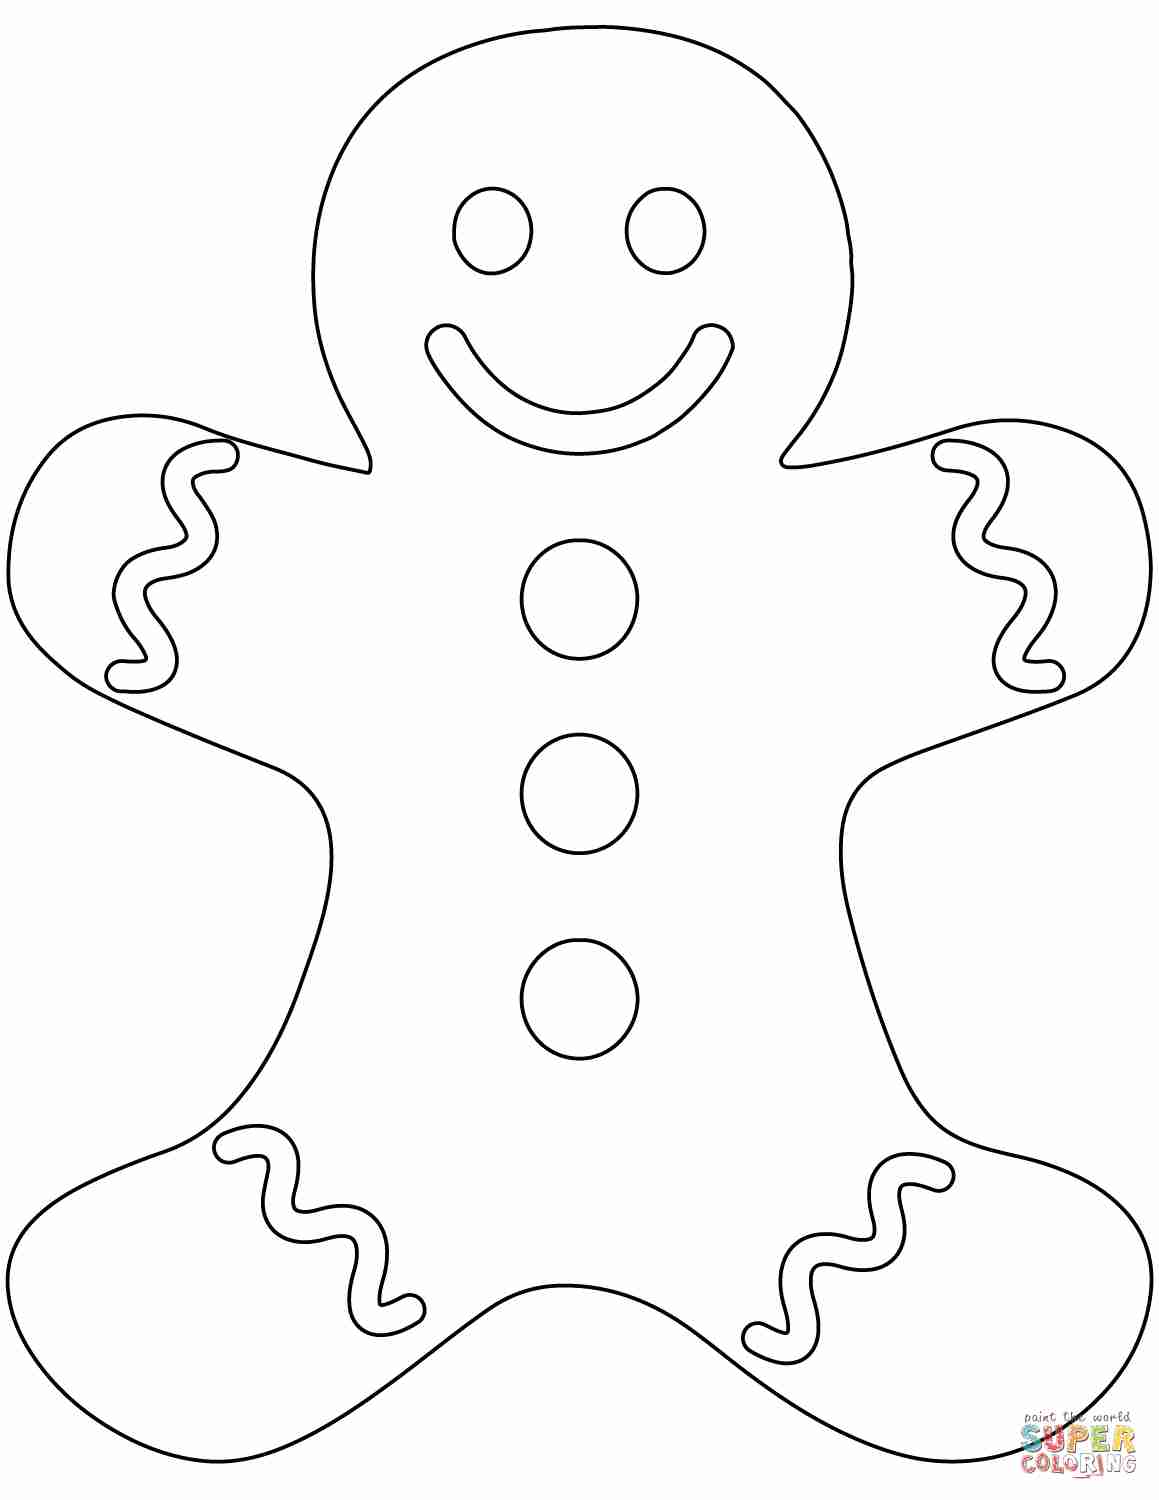 Gingerbread Girl Coloring Page at GetColorings.com | Free printable